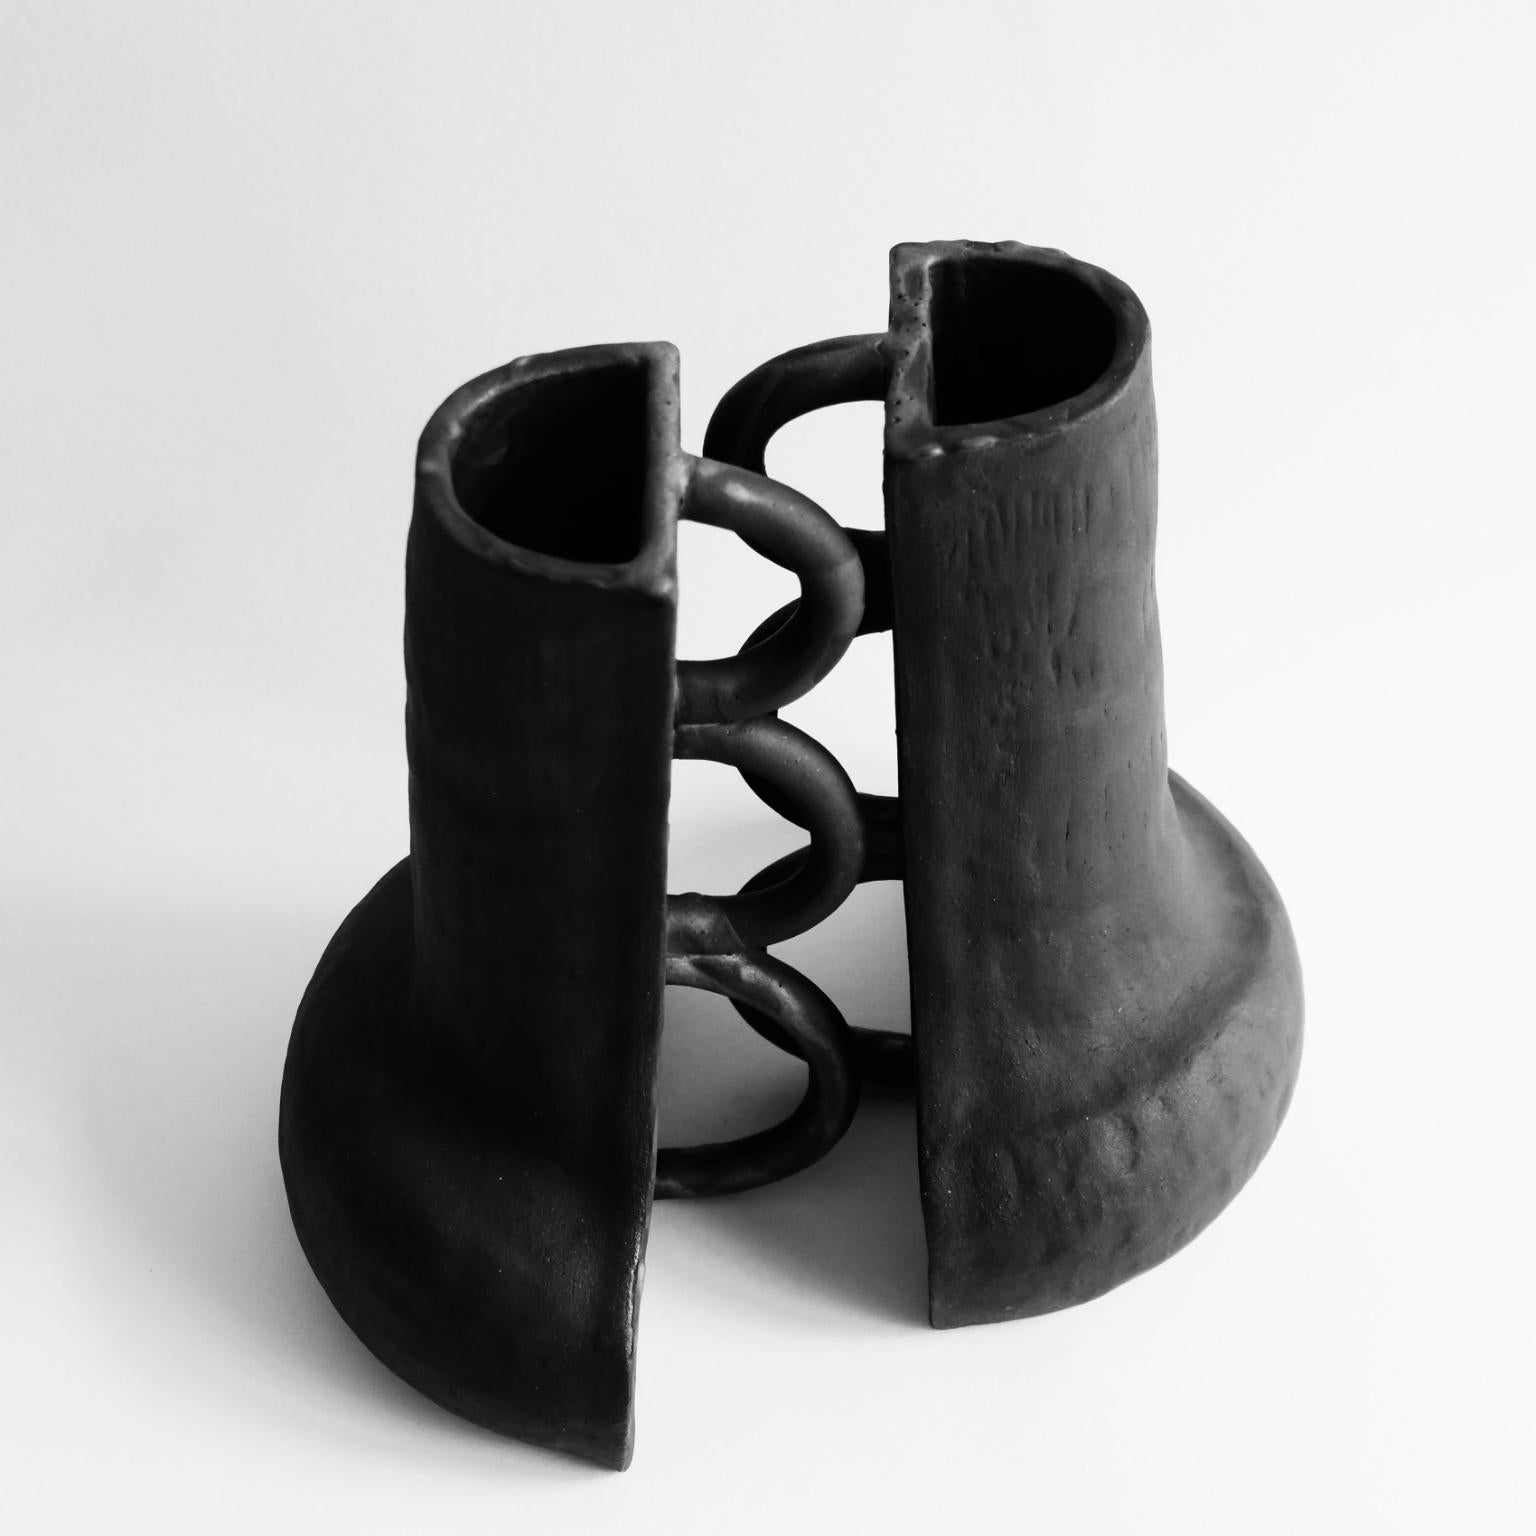 Set Of 2 Sculptural Fragment 01 Vases by Ia Kutateladze
One Of A Kind
Dimensions: W 19 x H 30 cm (each).
Materials: Raw black clay.

Fragment 01 vase is a sculptural, functional object hand-built from black clay. The contrasting sides- organic shape